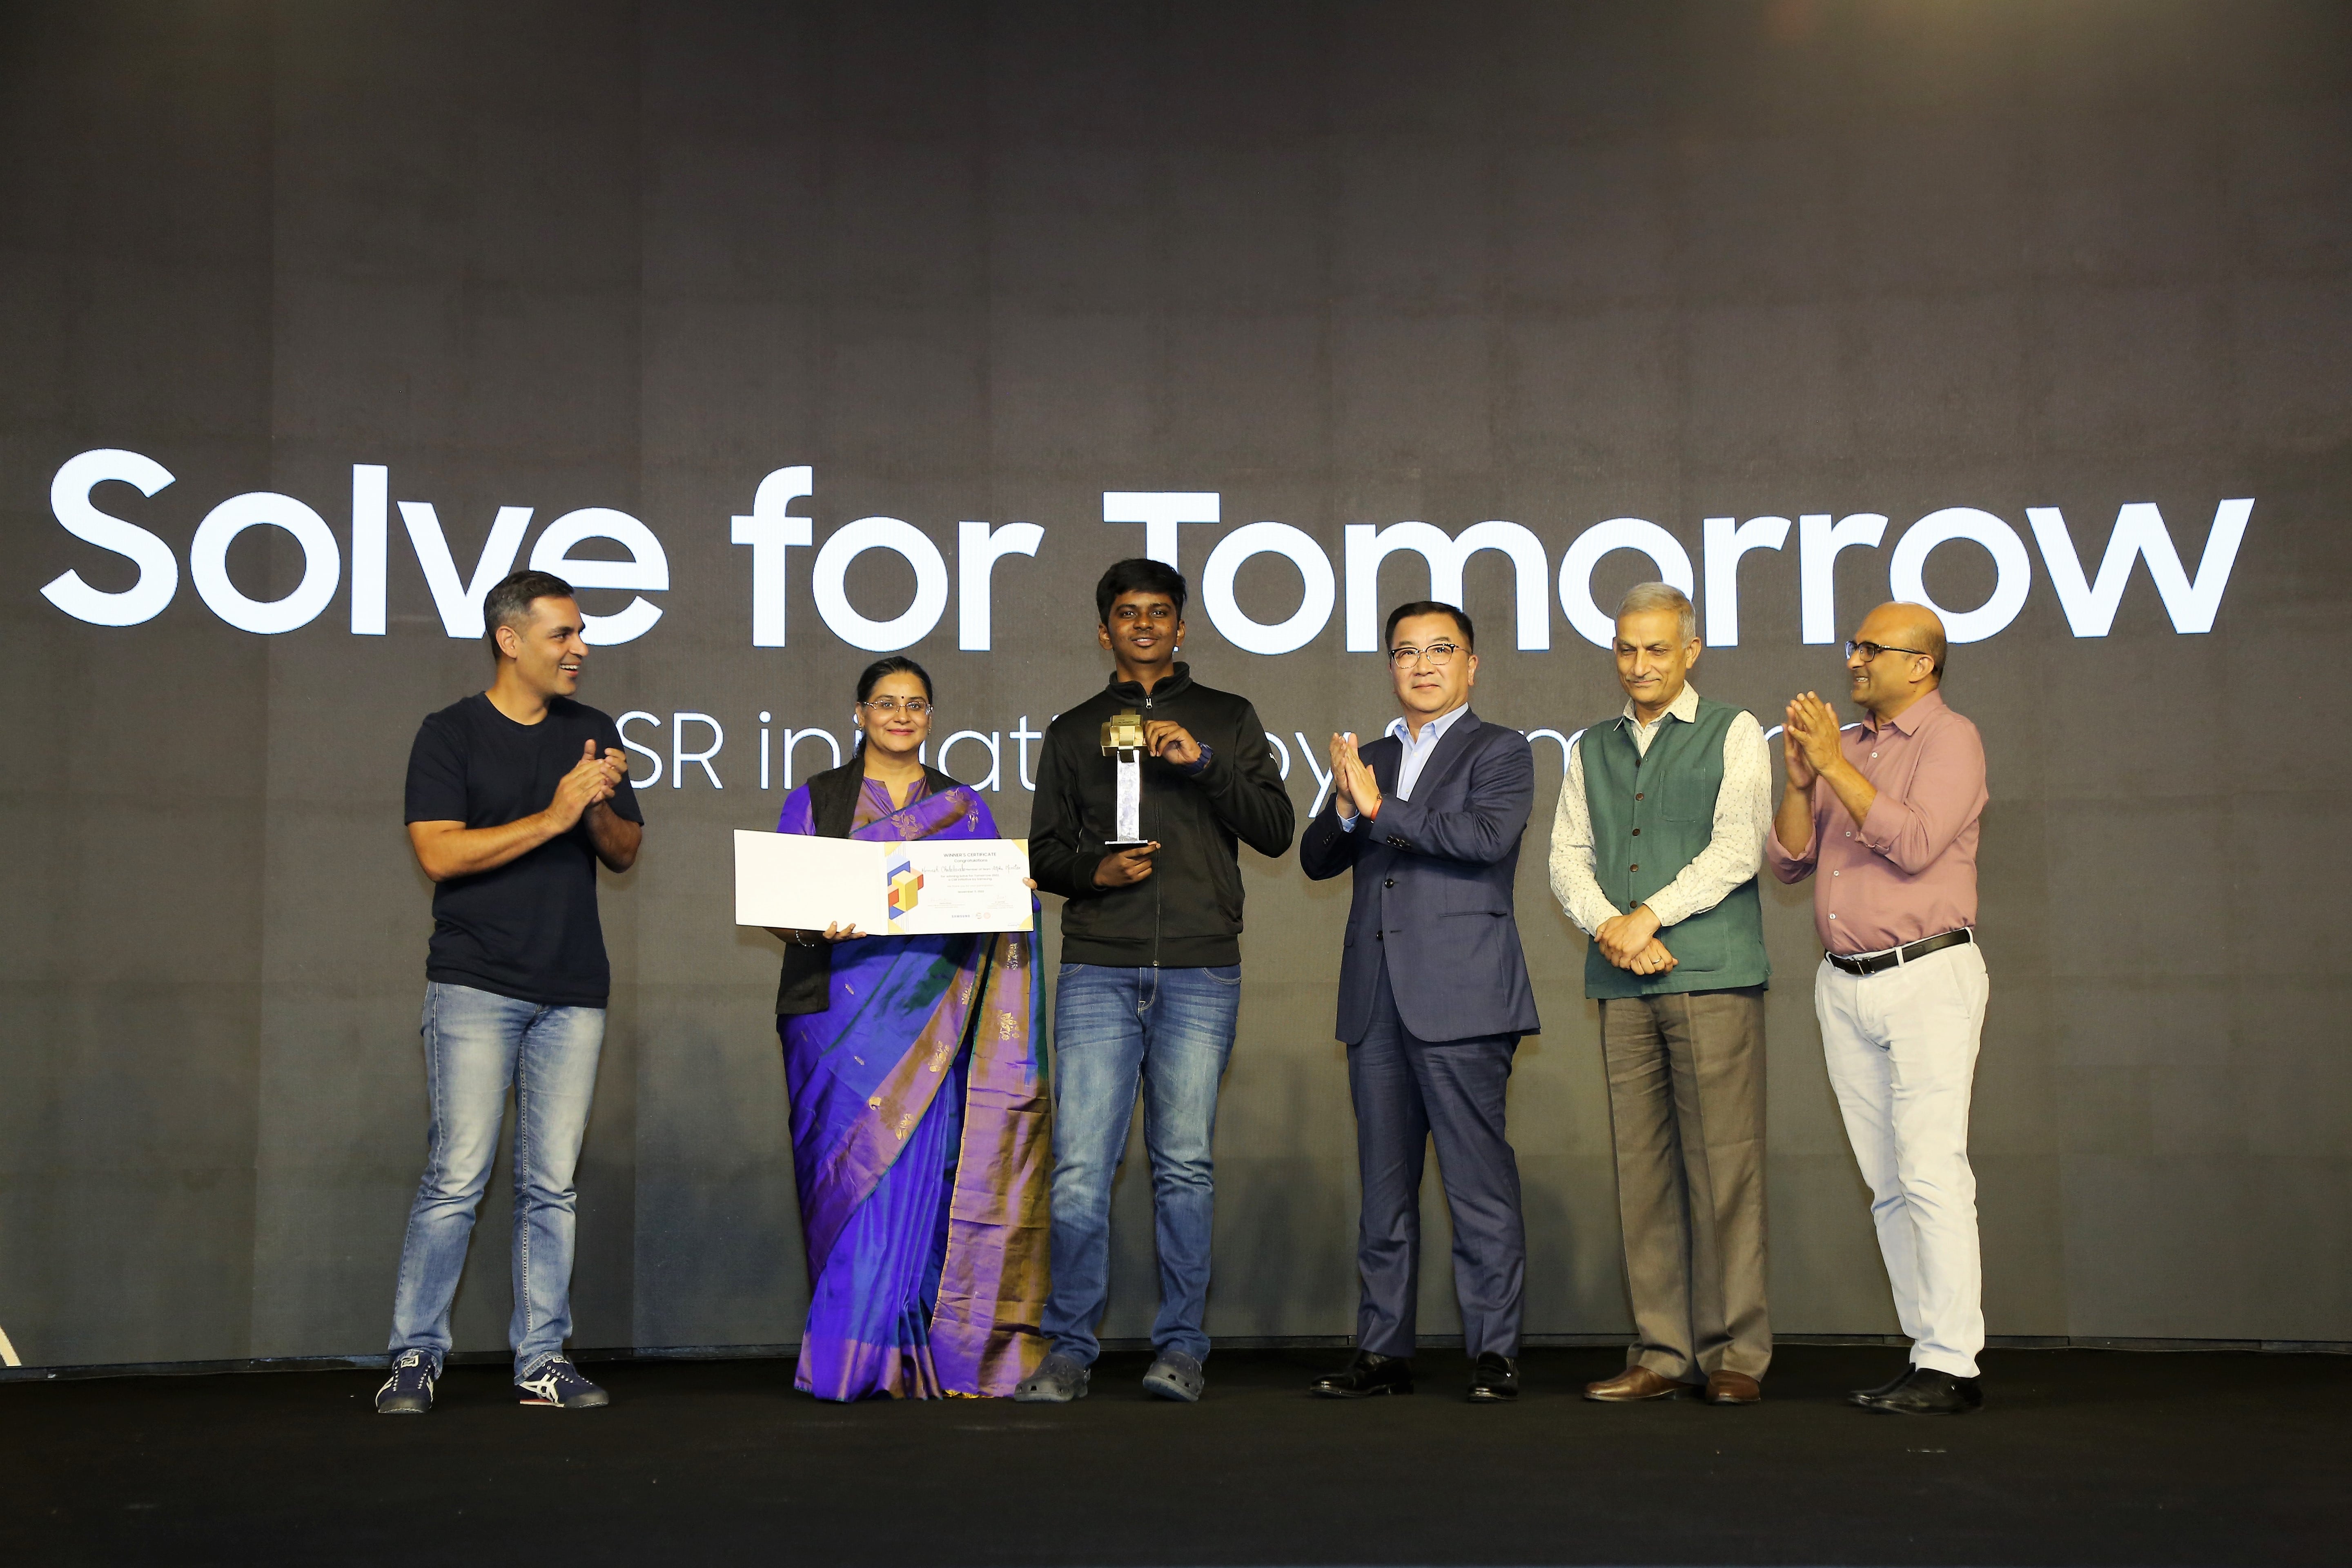 Girls’ Trio from Port Blair & Delhi and Boy Wonders from Hyderabad & Bengaluru Declared Top 3 Winning Teams of Solve for Tomorrow; Teams Get a Total Grant of INR 1 Crore & 6-Month Incubation at IIT Delhi to Turn their Ideas into Reality